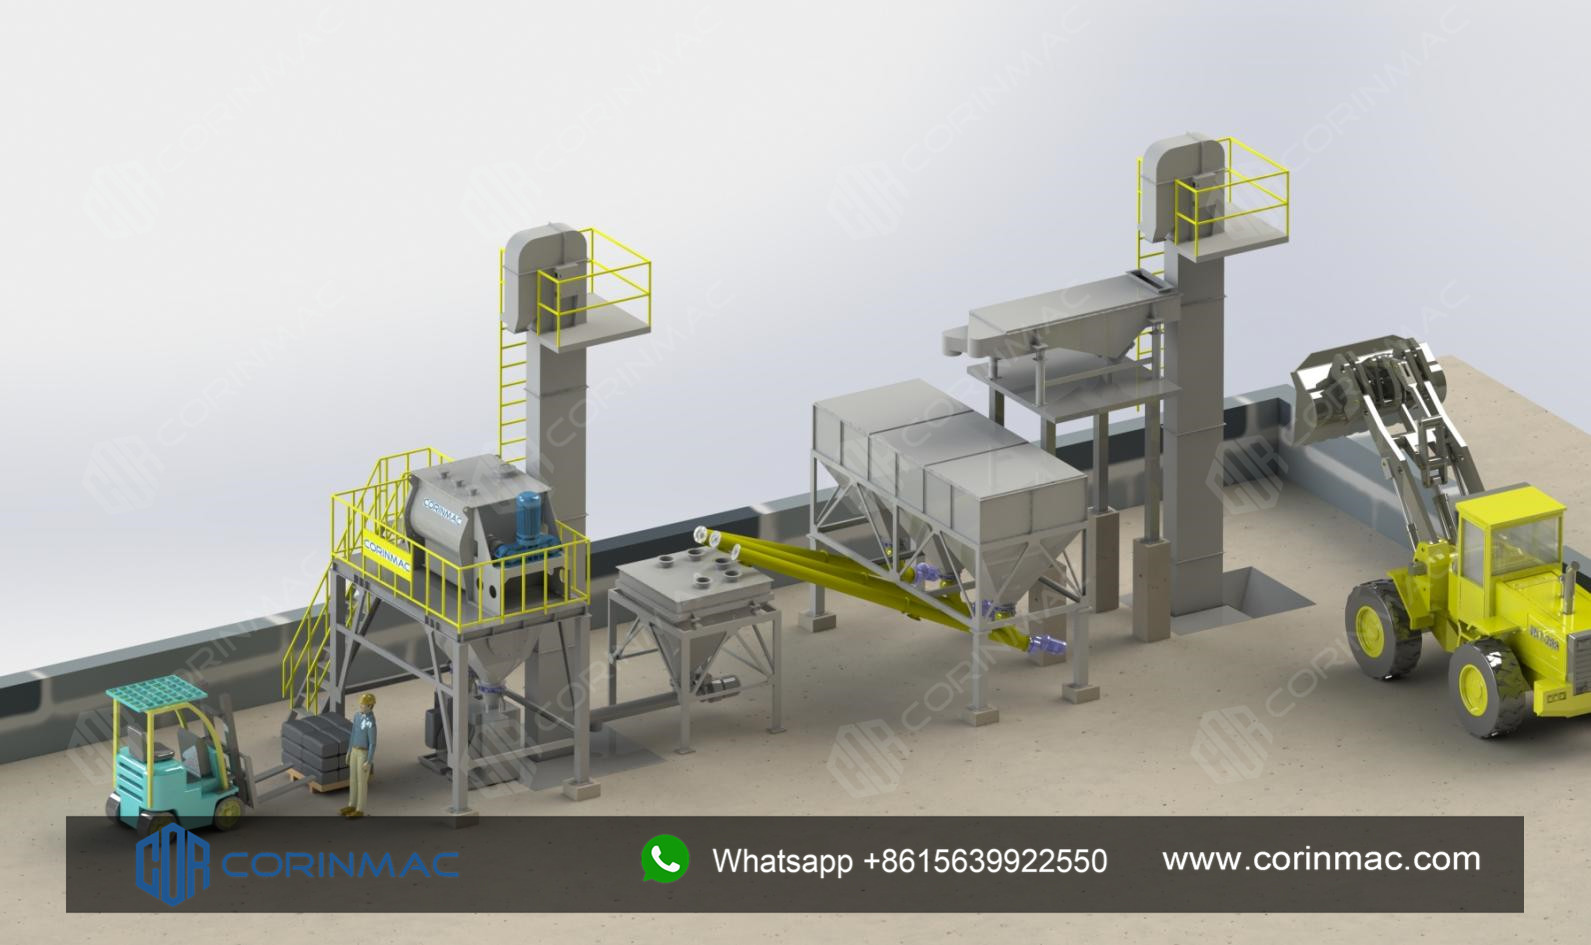 CRL-2 series production line includes